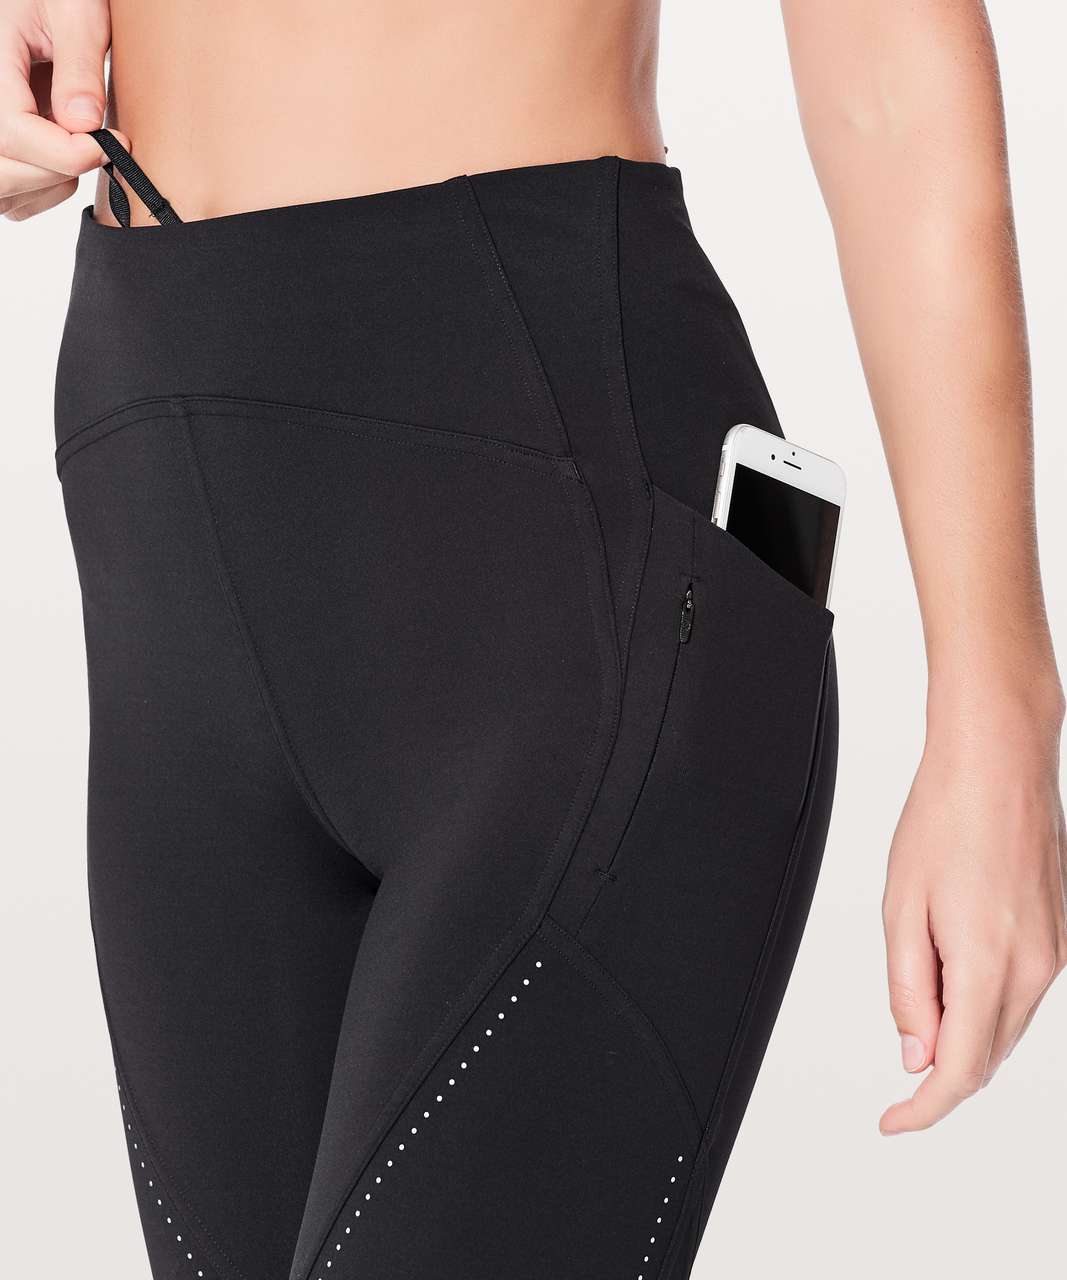 Lululemon Lead The Pack Tight Reflective 28" - Black